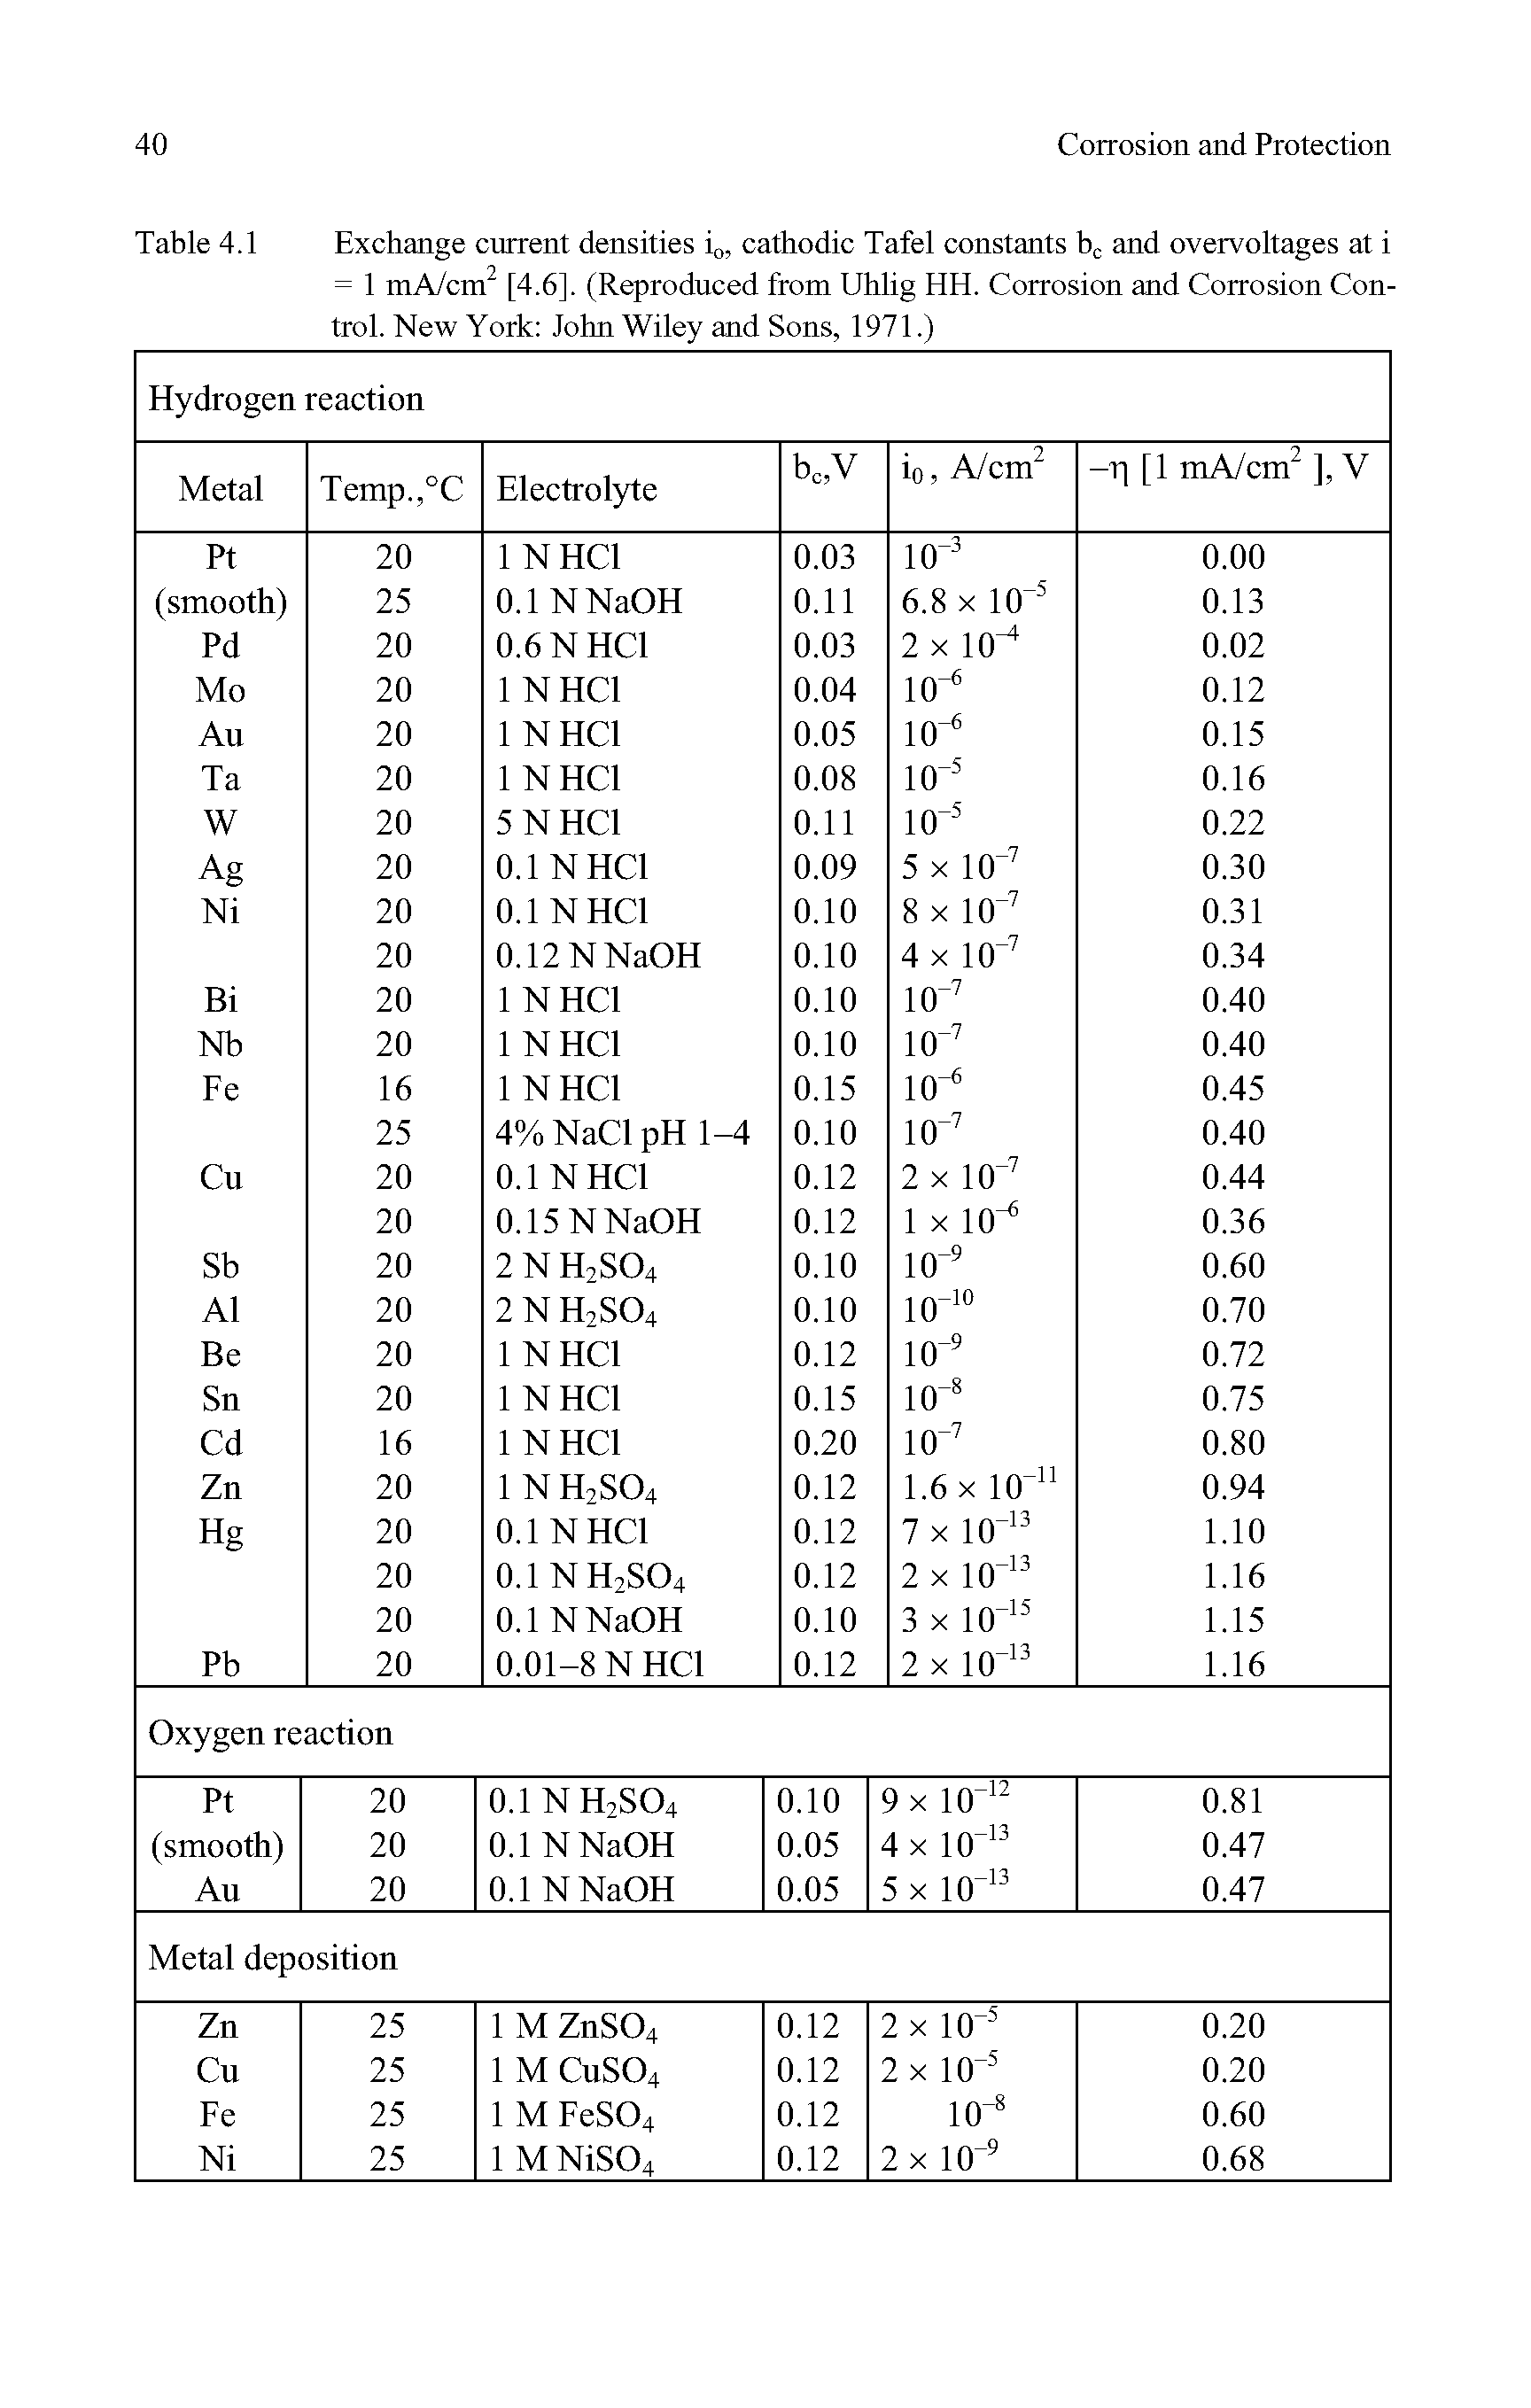 Table 4.1 Exchange current densities io, cathodic Tafel constants and overvoltages at i = 1 mA/cm [4.6], (Reproduced from Uhlig HH. Corrosion and Corrosion Control. New York John Wiley and Sons, 1971.)...